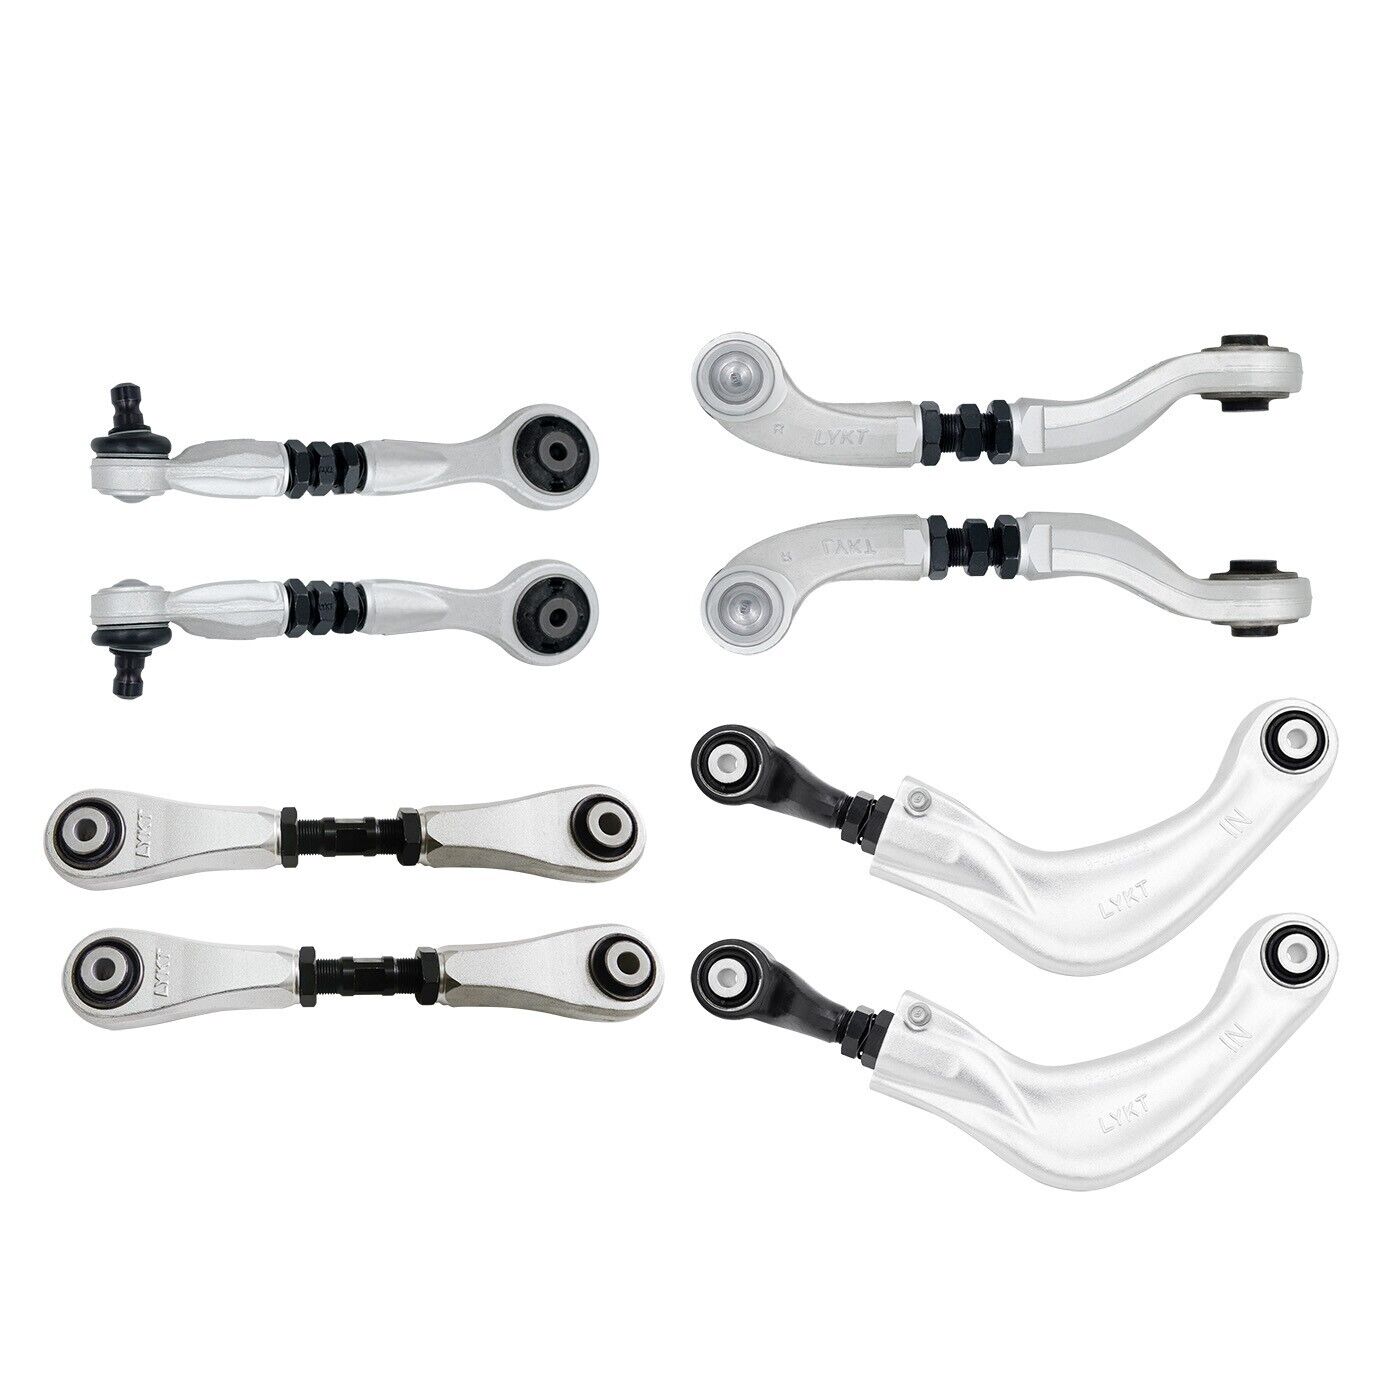 LYKT Adjustable Control Arm Kit For Audi A4 A5 A6 S4 S5 S6 S7 RS5 RS7 Q5 Macan